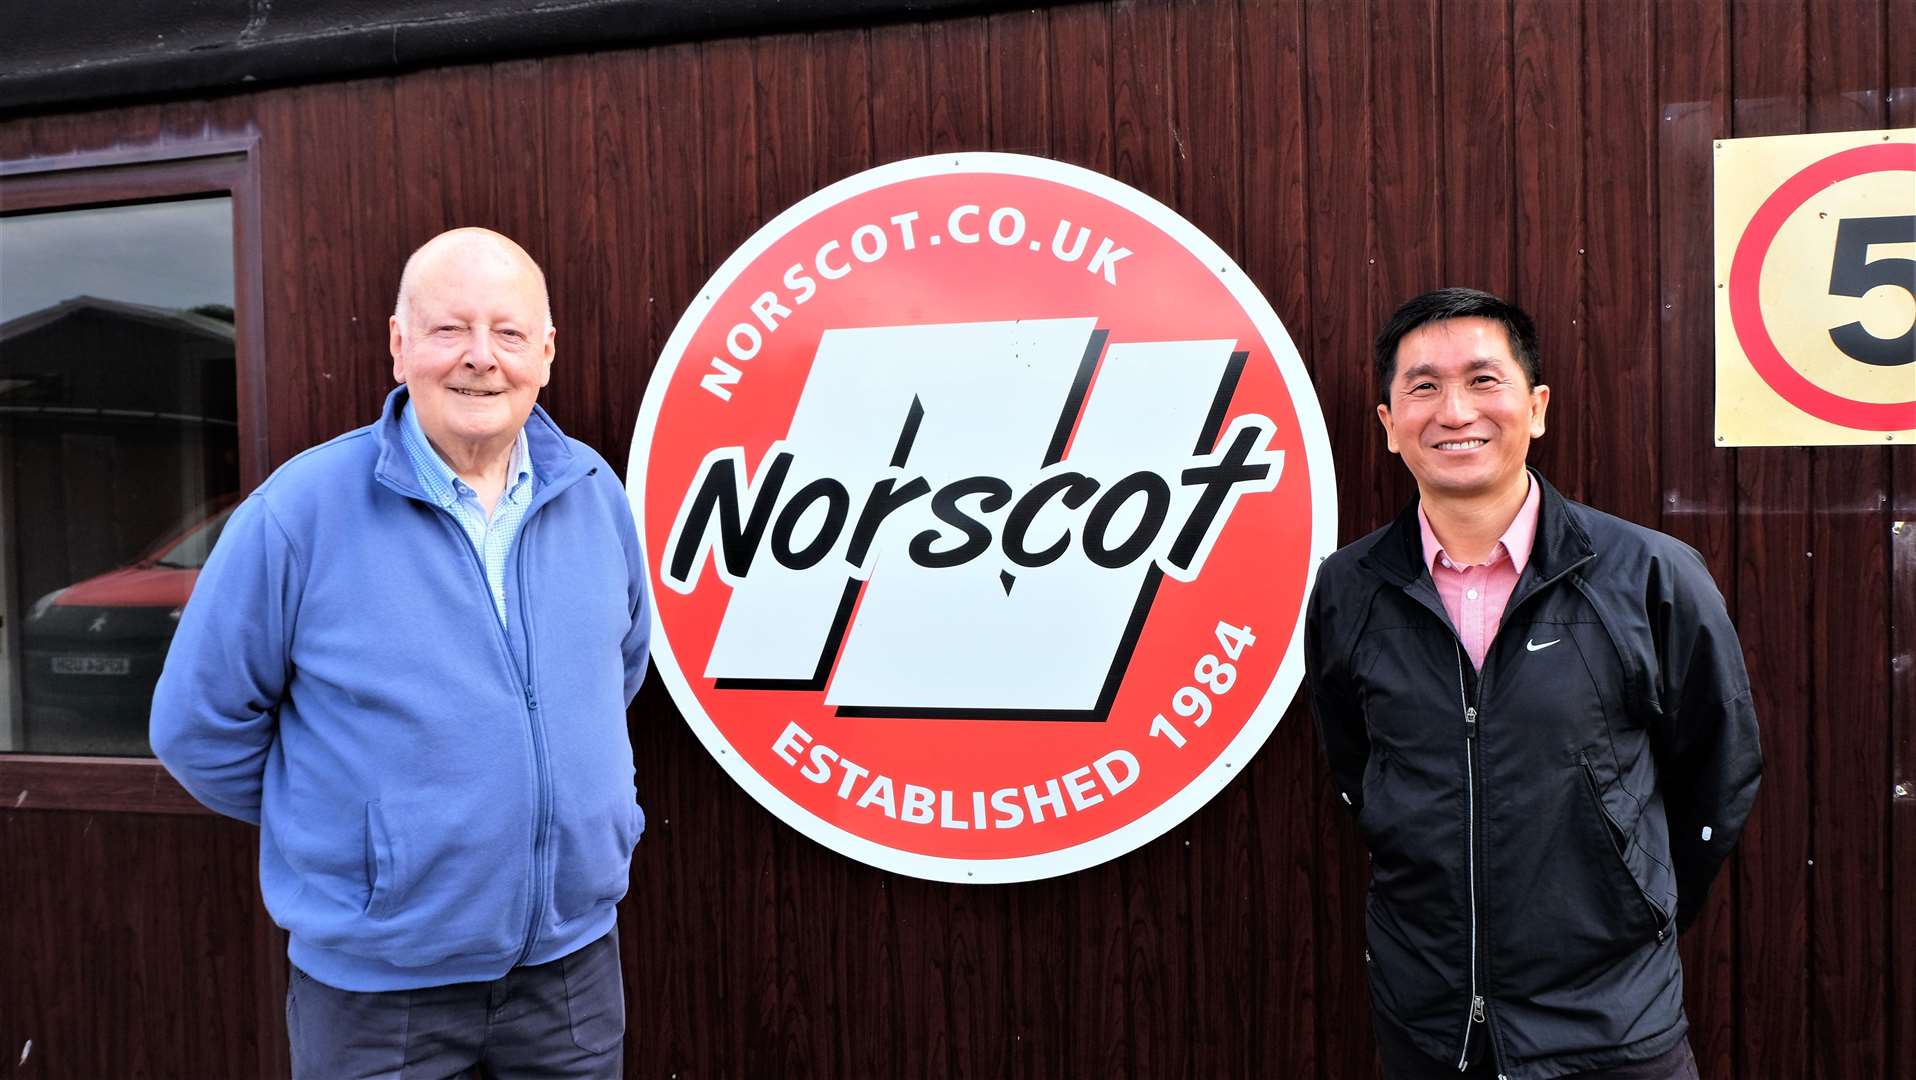 Former chairman and co-founder of Norscot Peter Body, at left, with 1st FSD Group CEO Tom Wang.